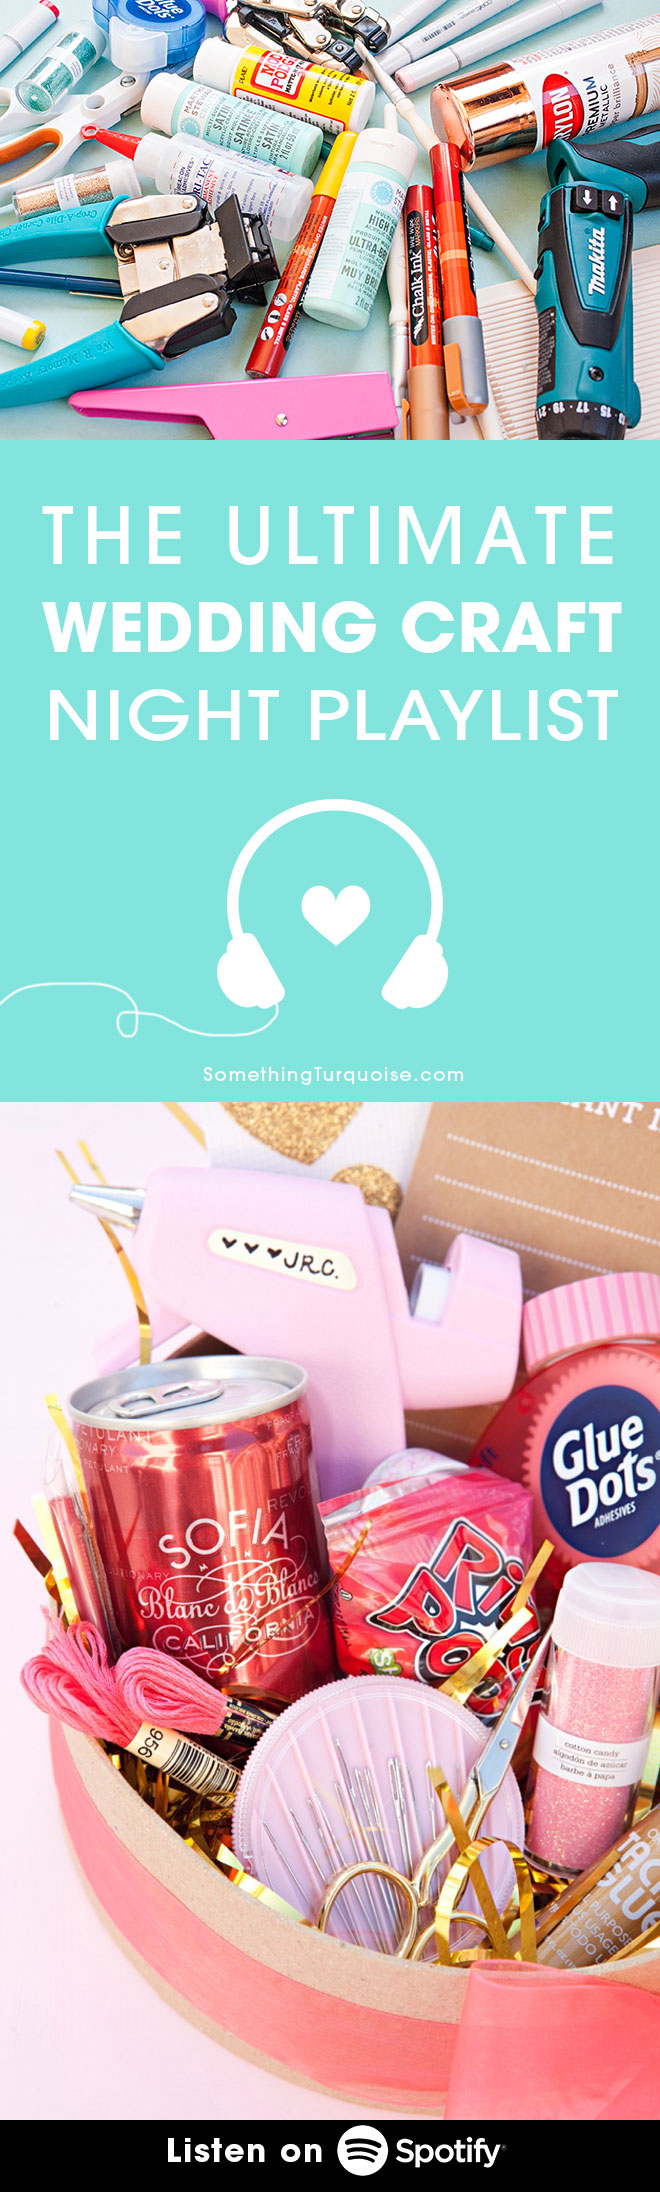 Such a fun Spotify Playlist to listen to while you are making wedding crafts!